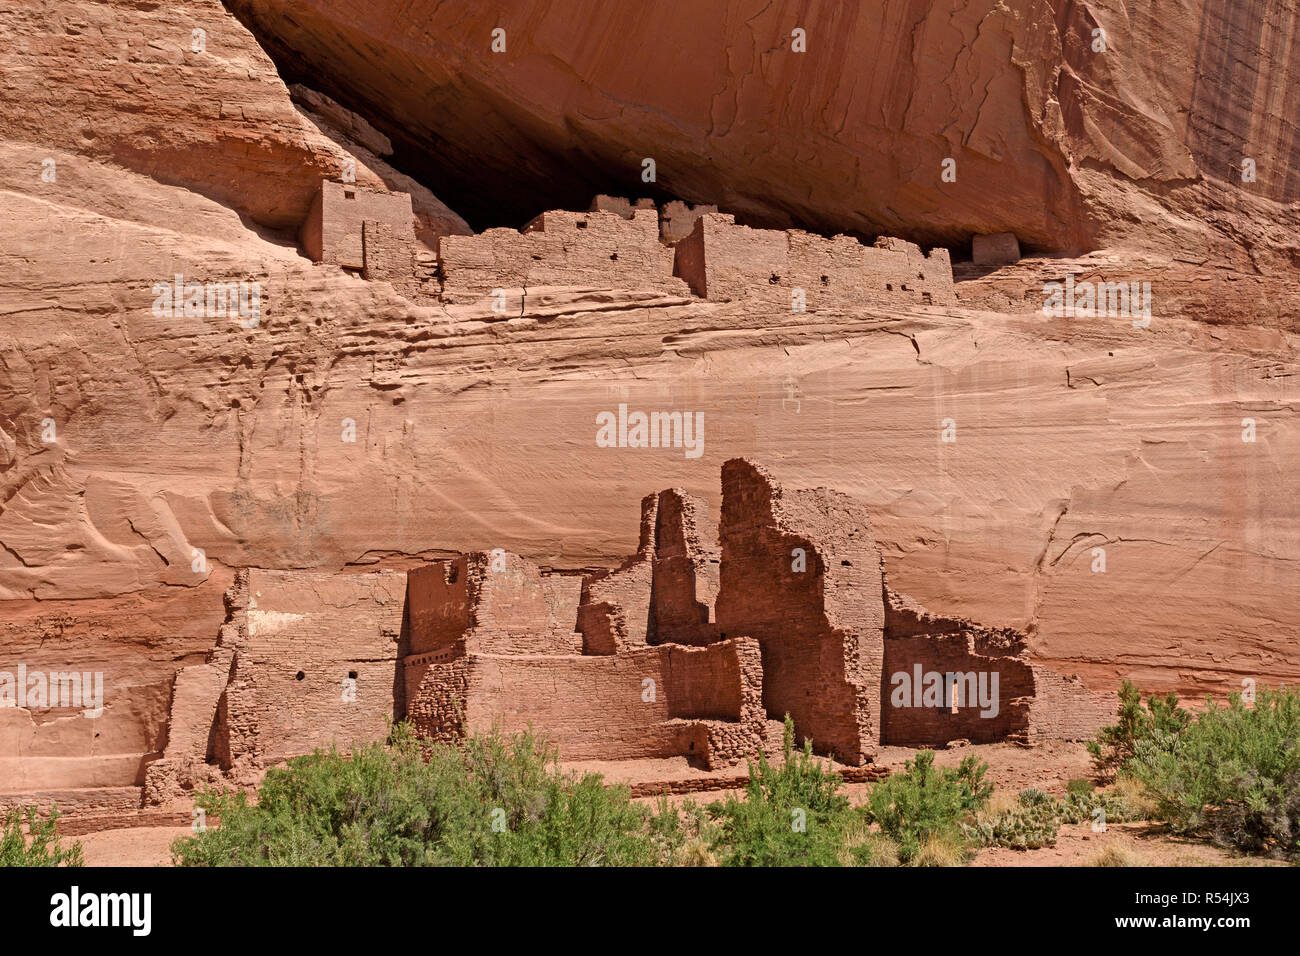 Ancient Cliff Dwellings in the Rocks Stock Photo